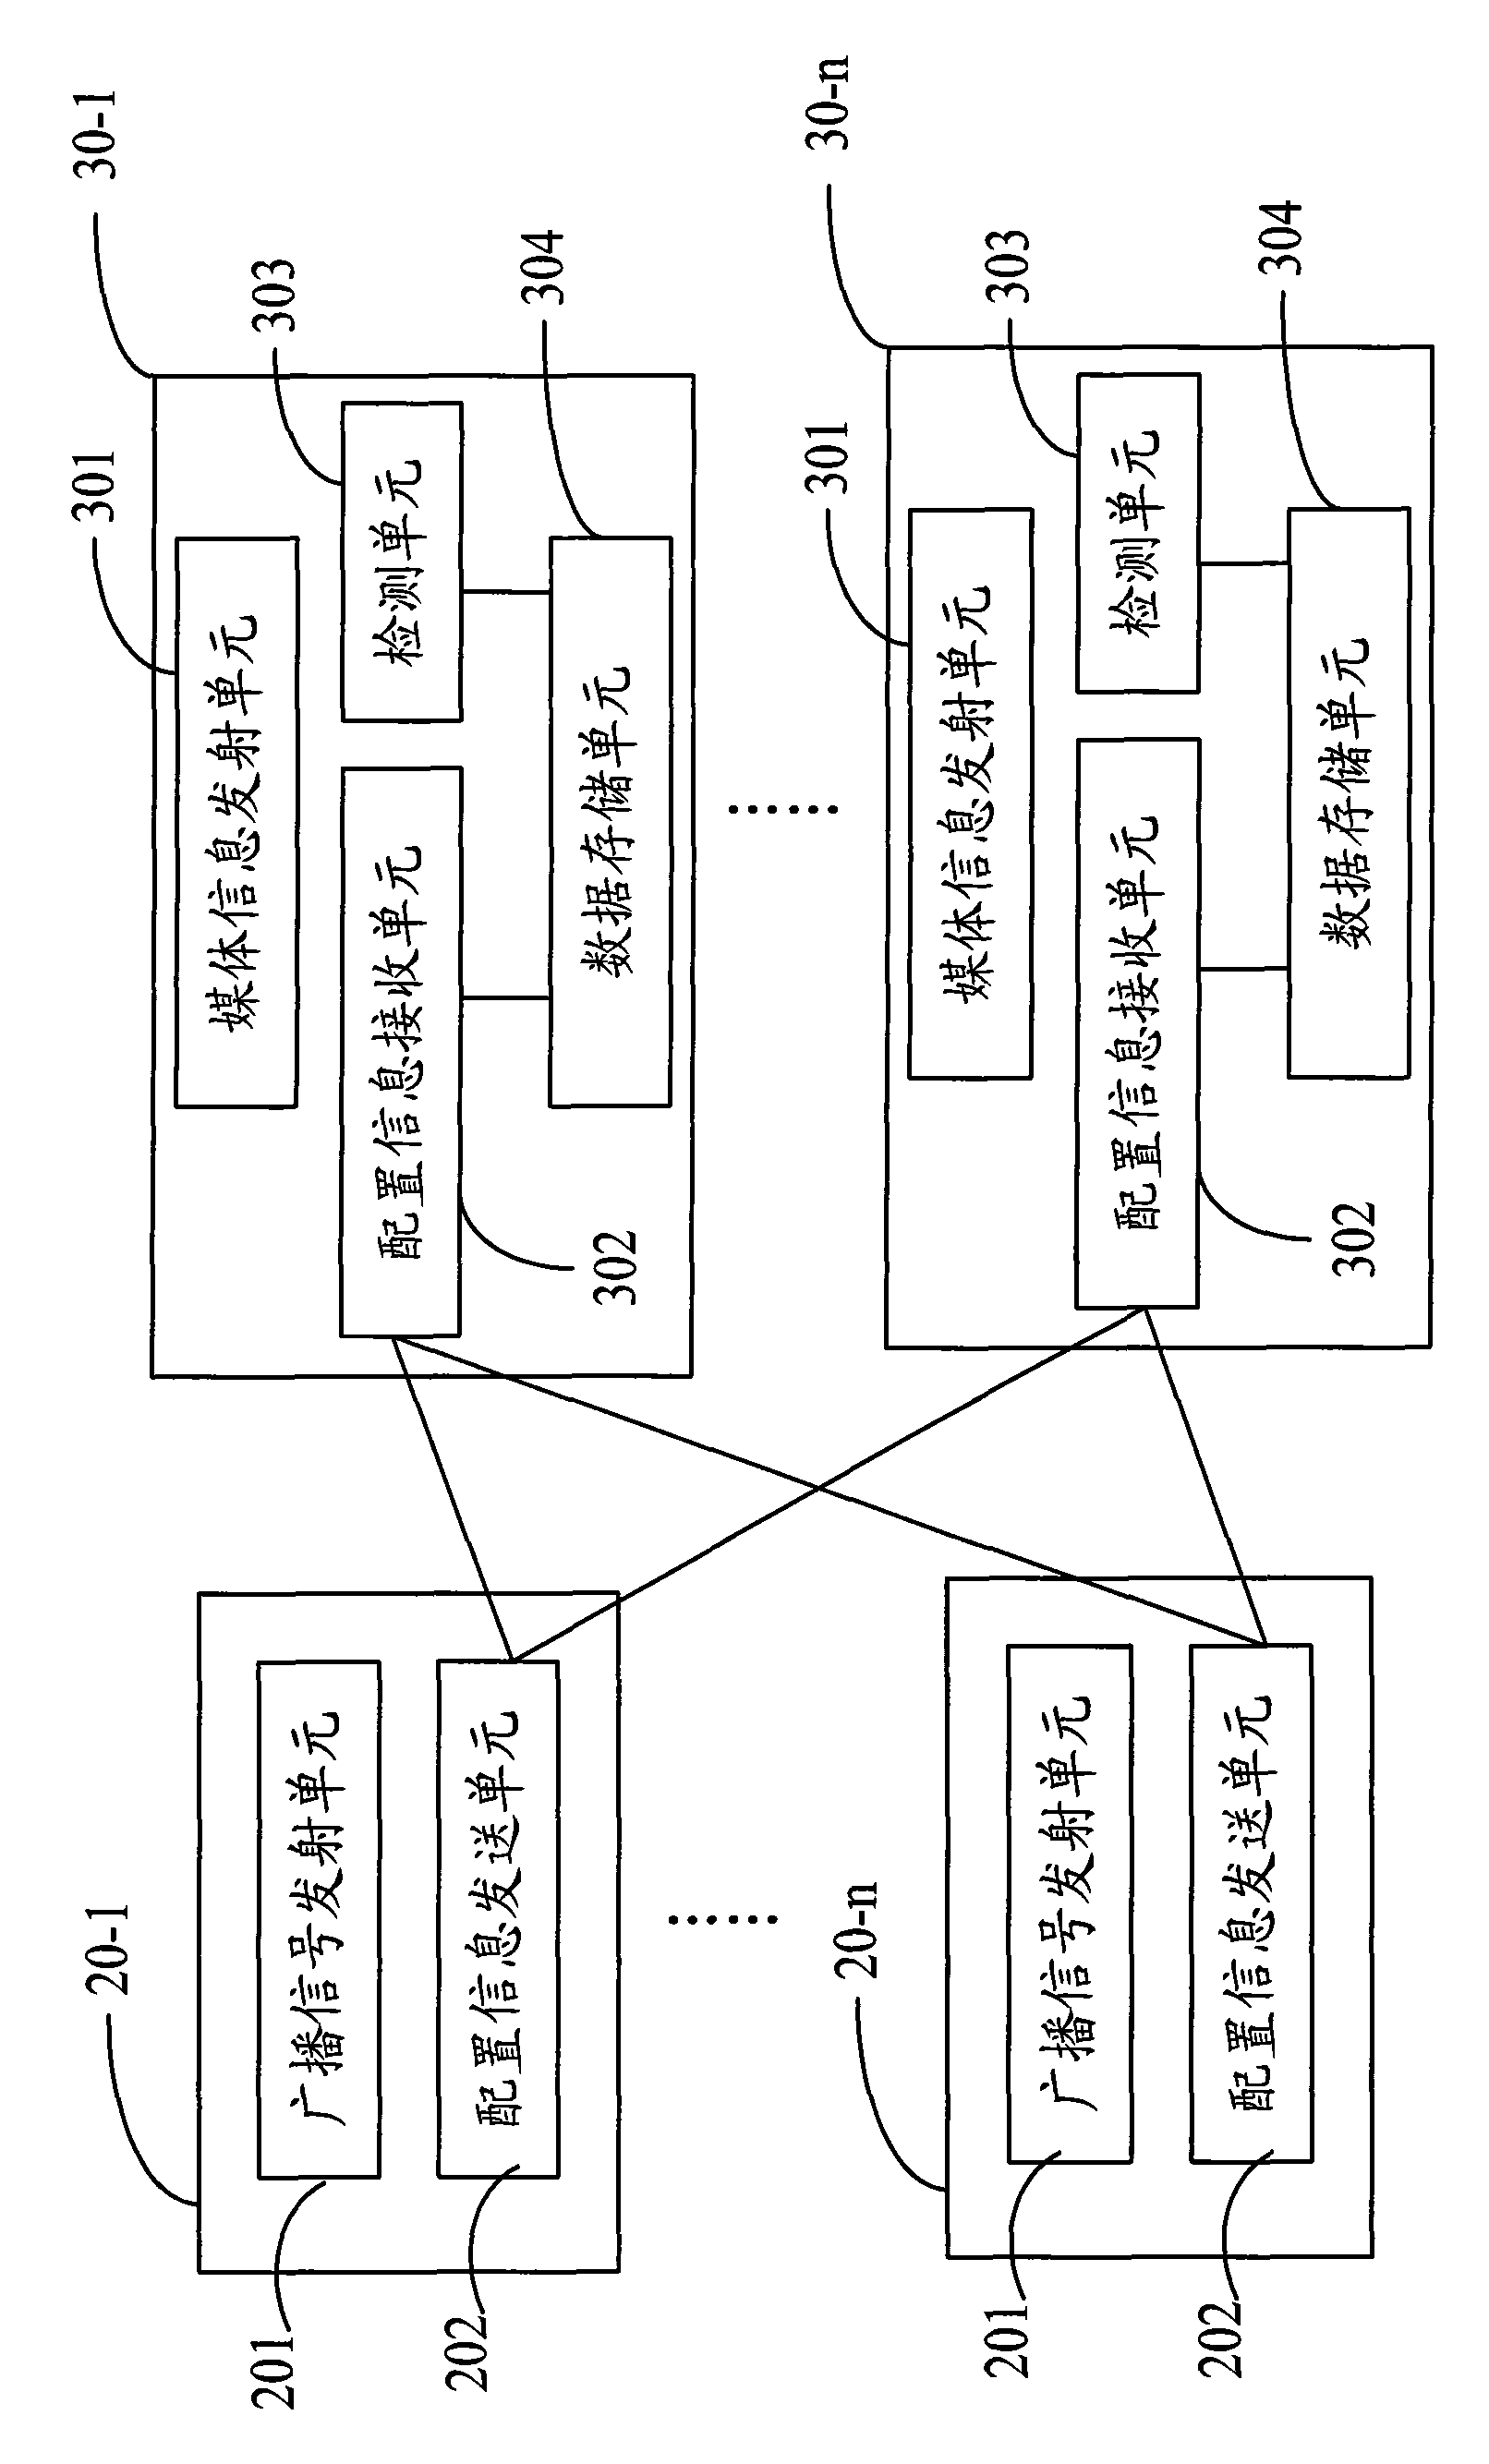 Hybrid network system and switching method based on same